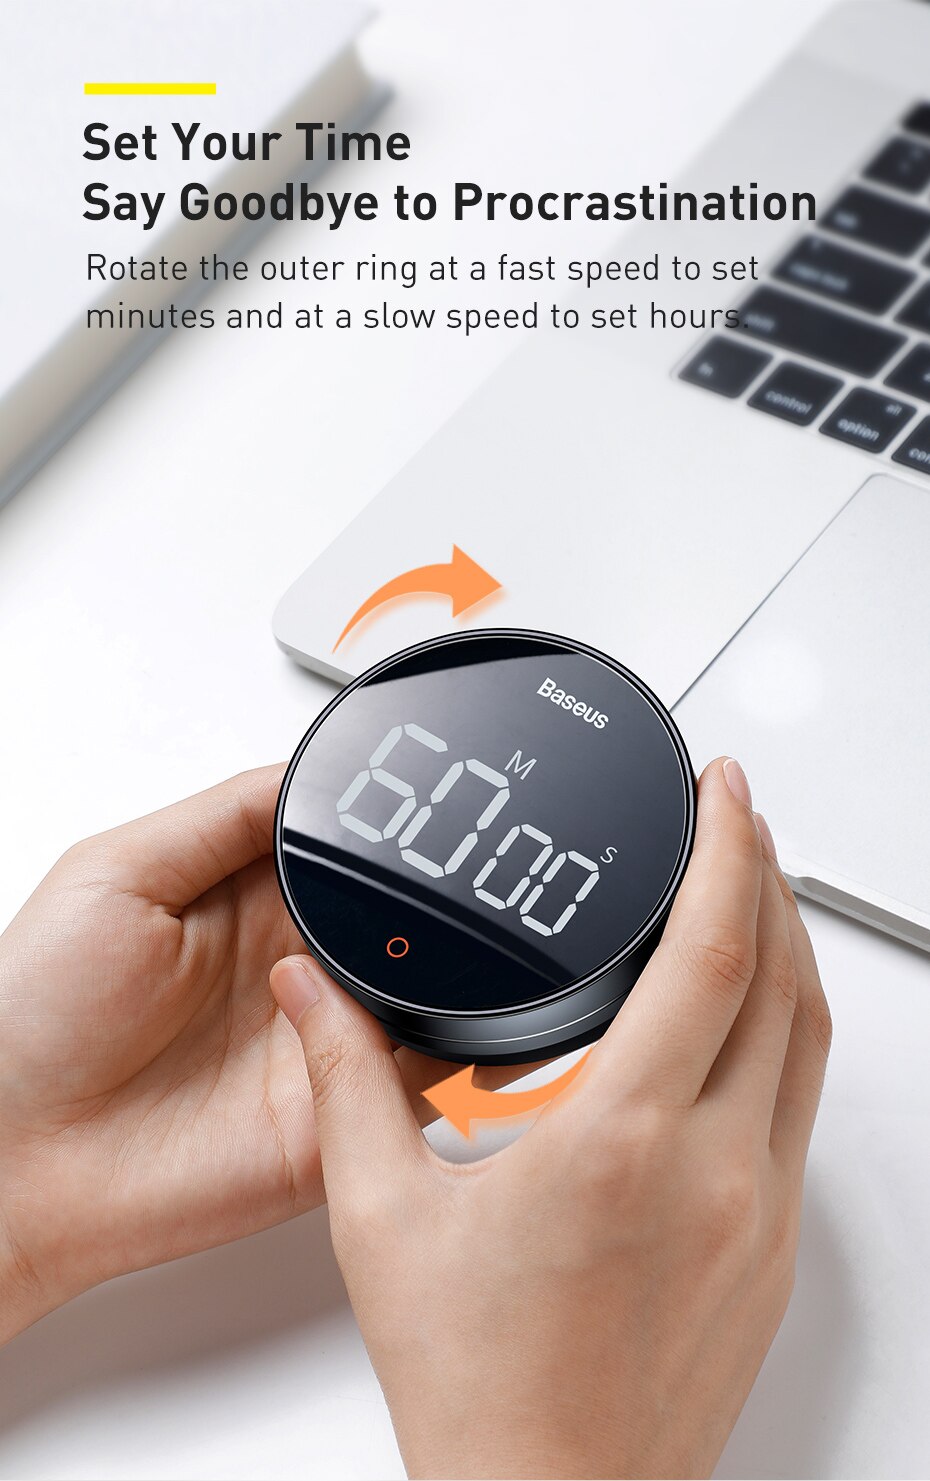 Baseus LED Digital Kitchen Timer For Cooking Shower Study Stopwatch Alarm  Clock Magnetic Electronic Cooking Countdown Time Timer